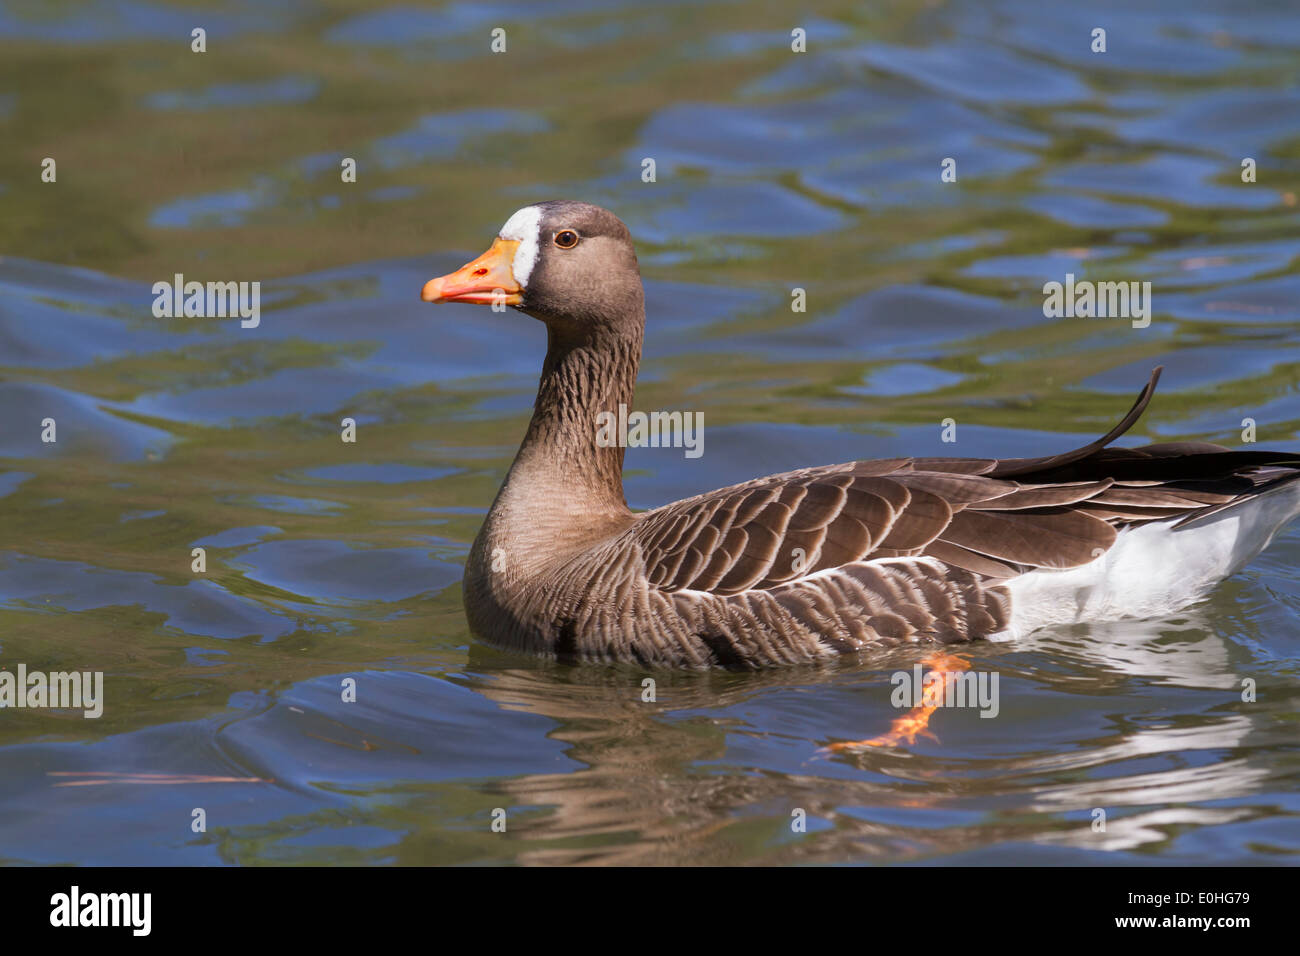 The greater white-fronted goose (Anser albifrons). Stock Photo